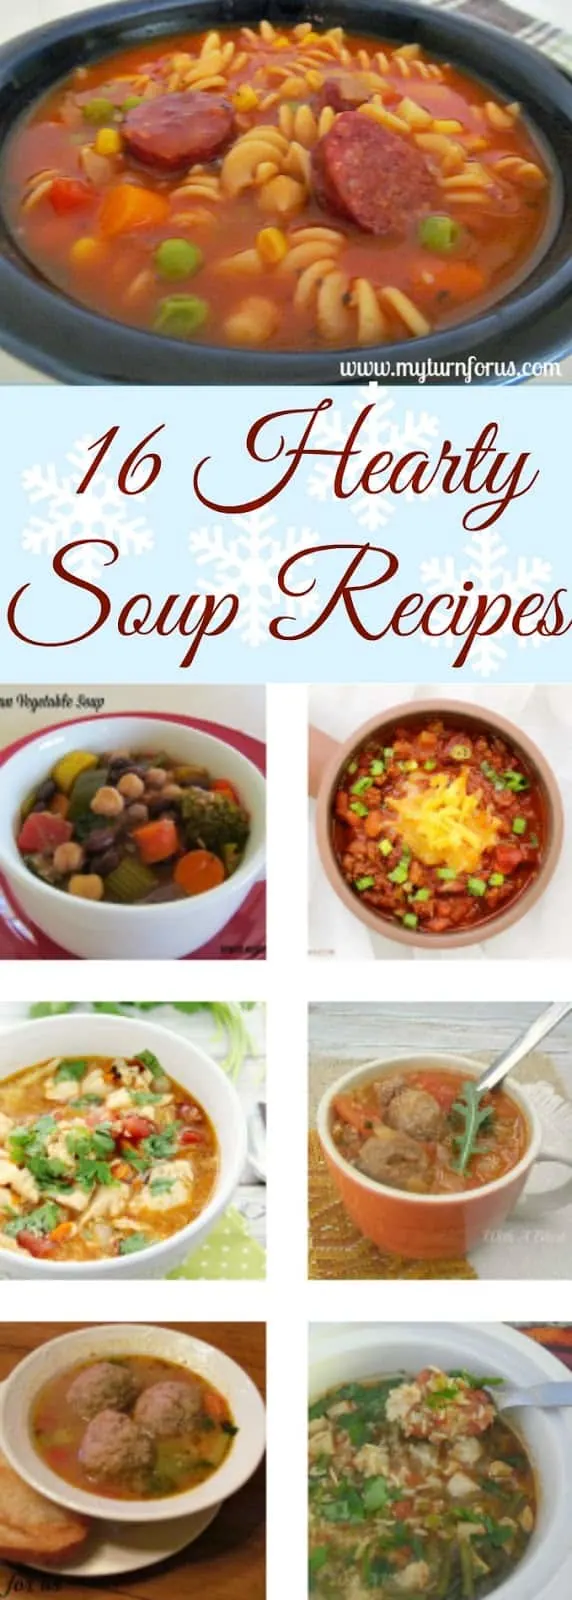 16 Hearty Soup Recipes all family tried, tested and approved - most are long time favorites and all perfect during Fall and Winter #SoupRecipes #HeartySoupRecipes #ComfortFood #Soup